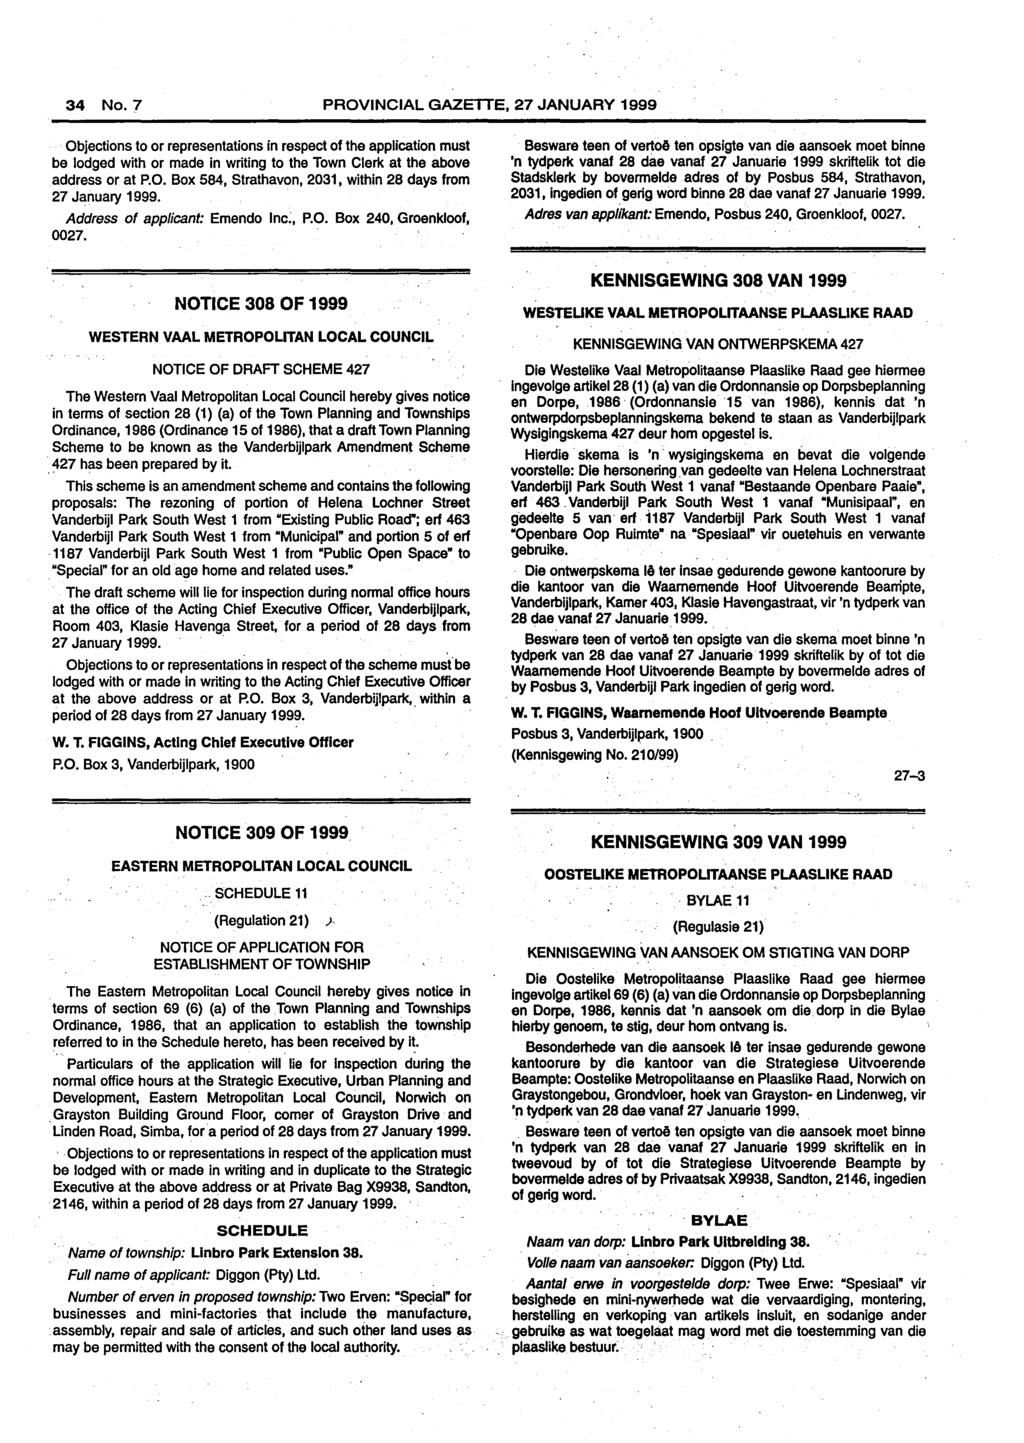 34 No.7 PROVINCIAL GAZETTE, 27 JANUARY 1999 Objections to or representations in respect of the application must be lodged with or made in writing to the Town Clerk at the above address or at P.O. Box 584, Strathavon, 2031, within 28 days from 27 January 1999.